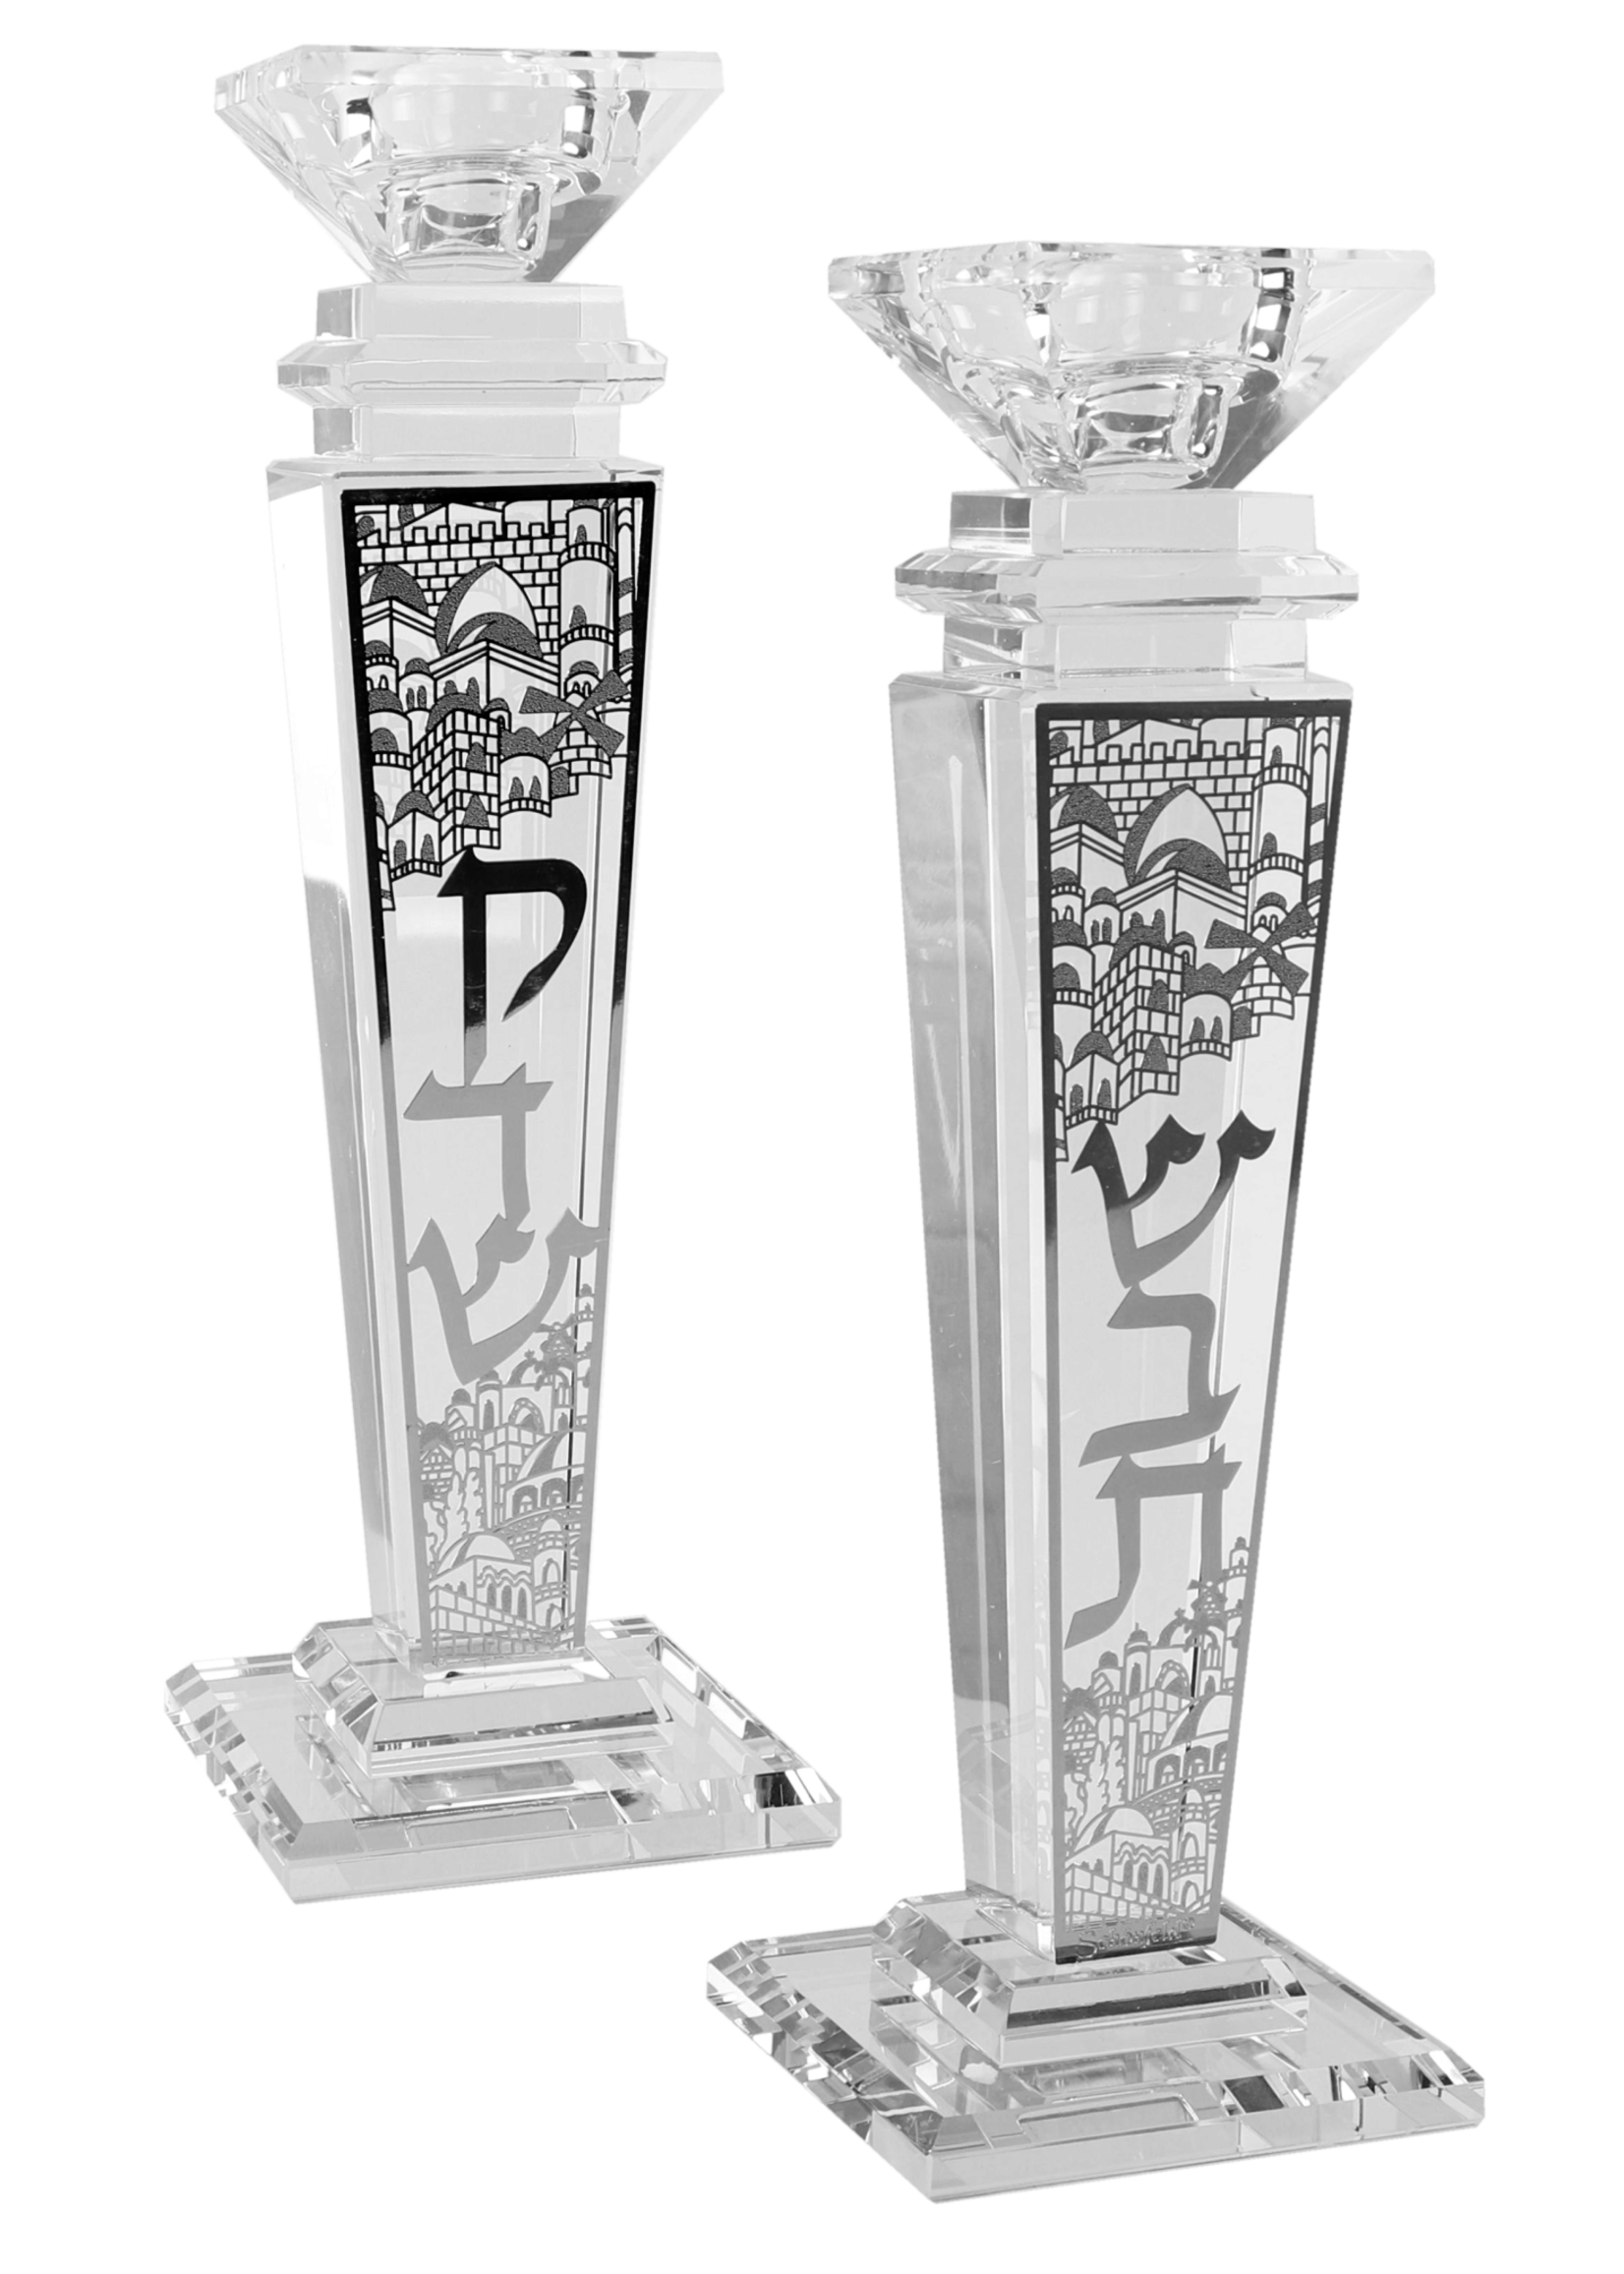 CANDLESTICKS CRYSTAL WITH SILVER JERUSALEM DETAILING0- 9.5H X 1.5W